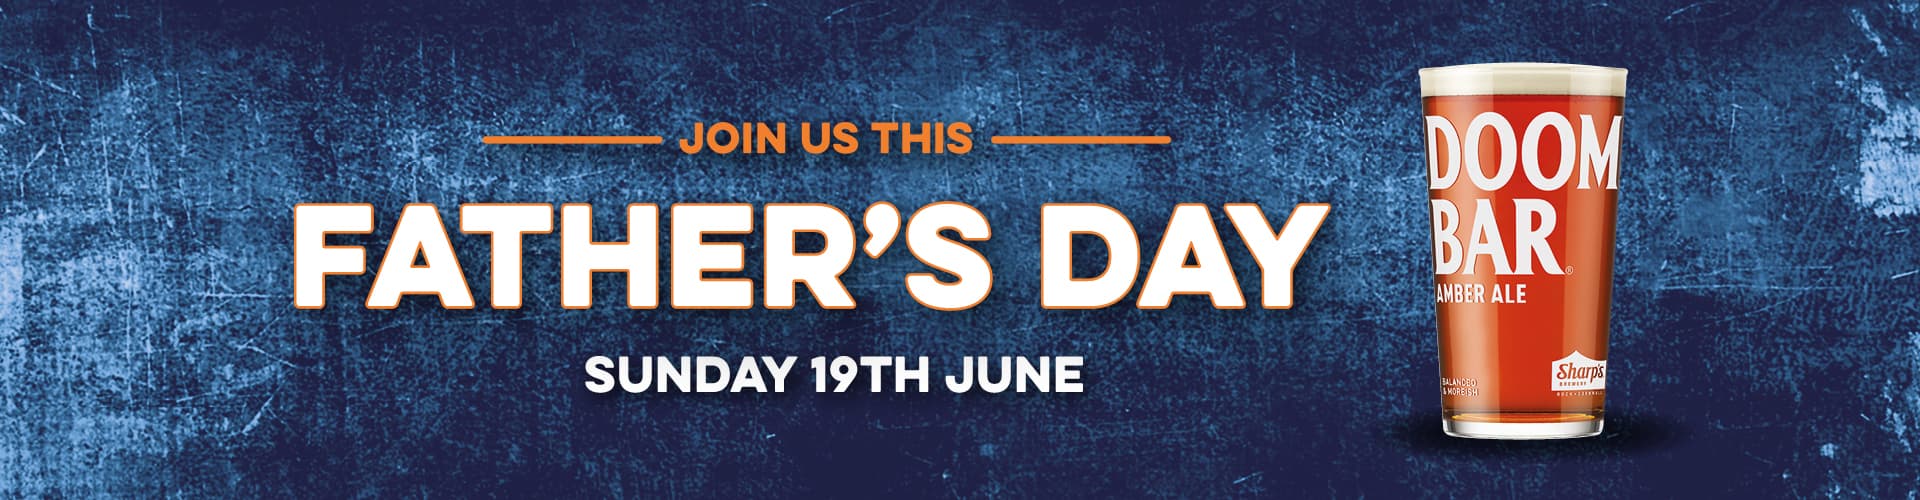 Father's Day at The Caledonian pub in Inverness